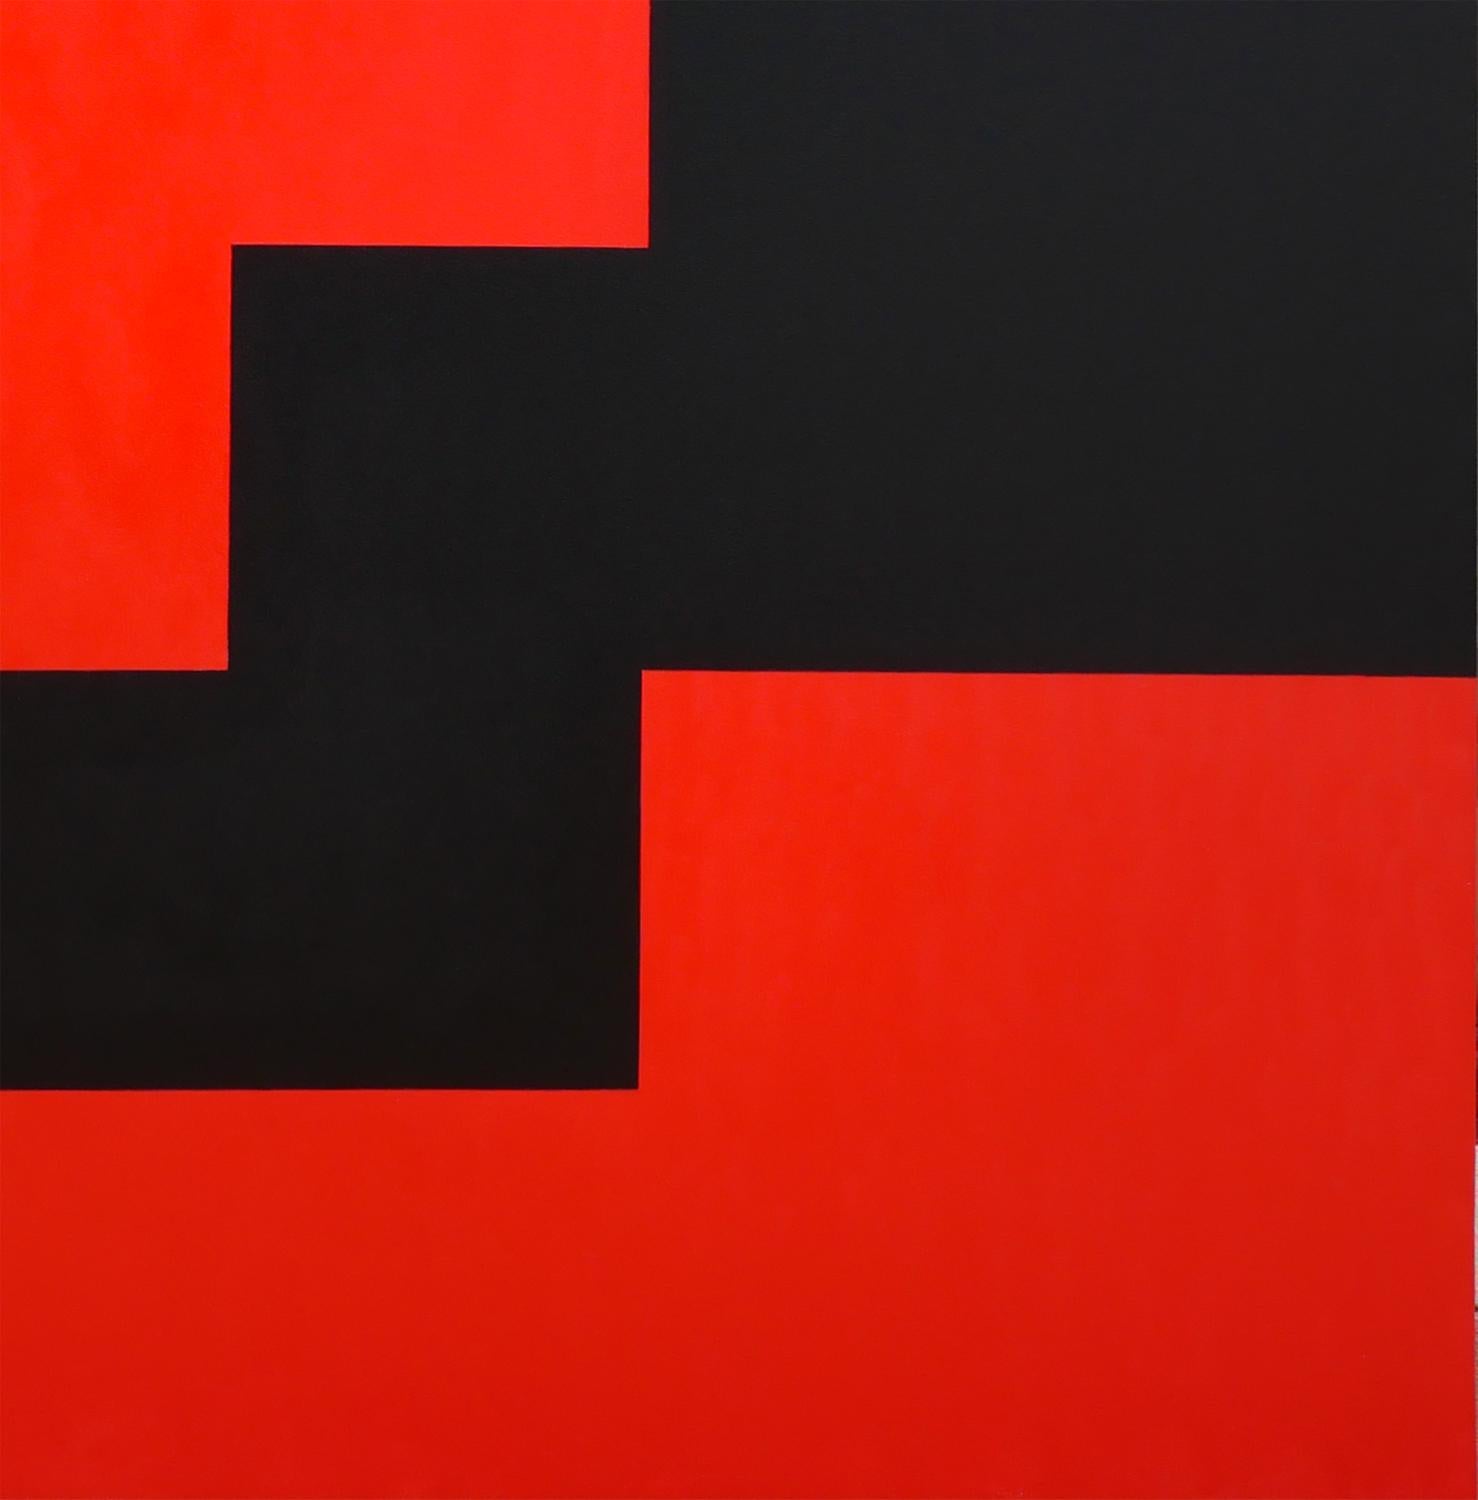 Geometric abstract contemporary acrylic painting by Houston, TX artist Mark Flood. The piece depicts geometric blocks of shapes in a striking red-and-black contrast.  The artist signed the piece on the back of the canvas. 

Artist Biography: Mark